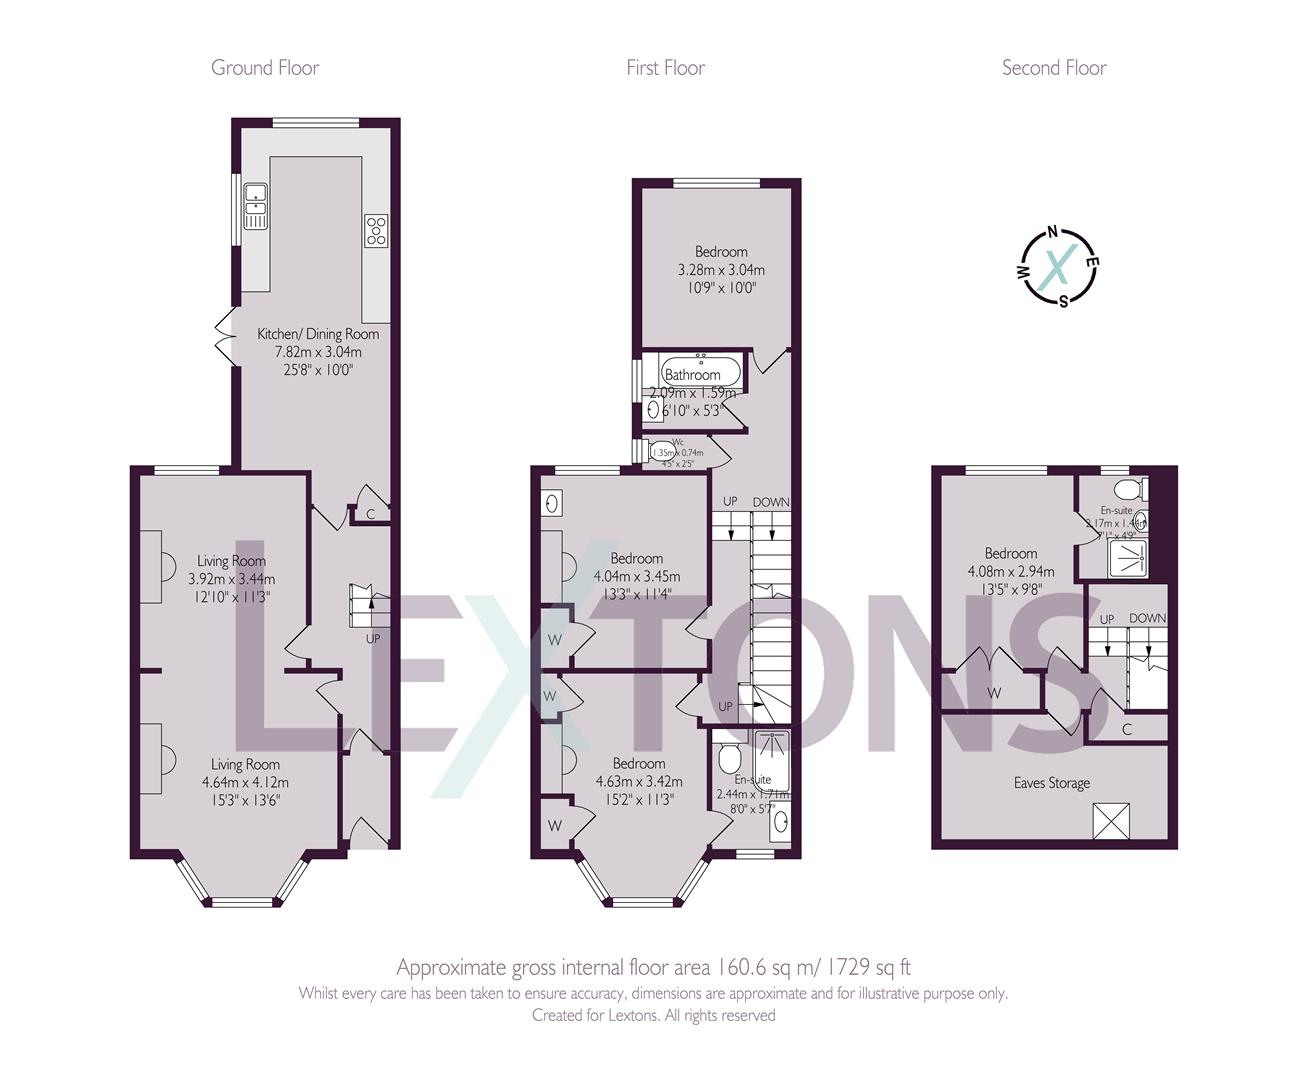 Floorplans For Newtown Road, Hove